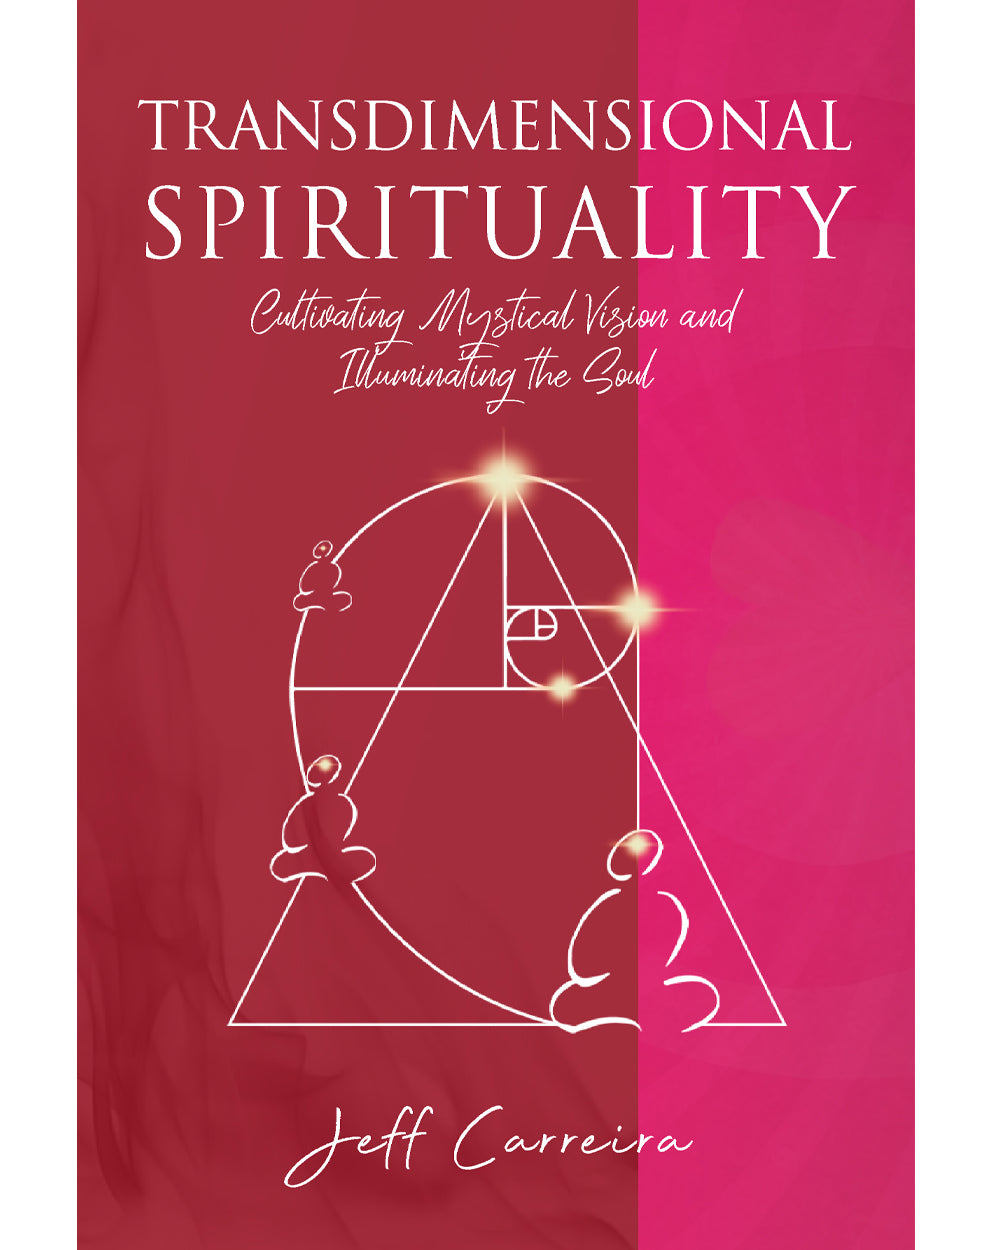 Transdimensional Spirituality: Cultivating Mystical Vision and Illuminating the Soul